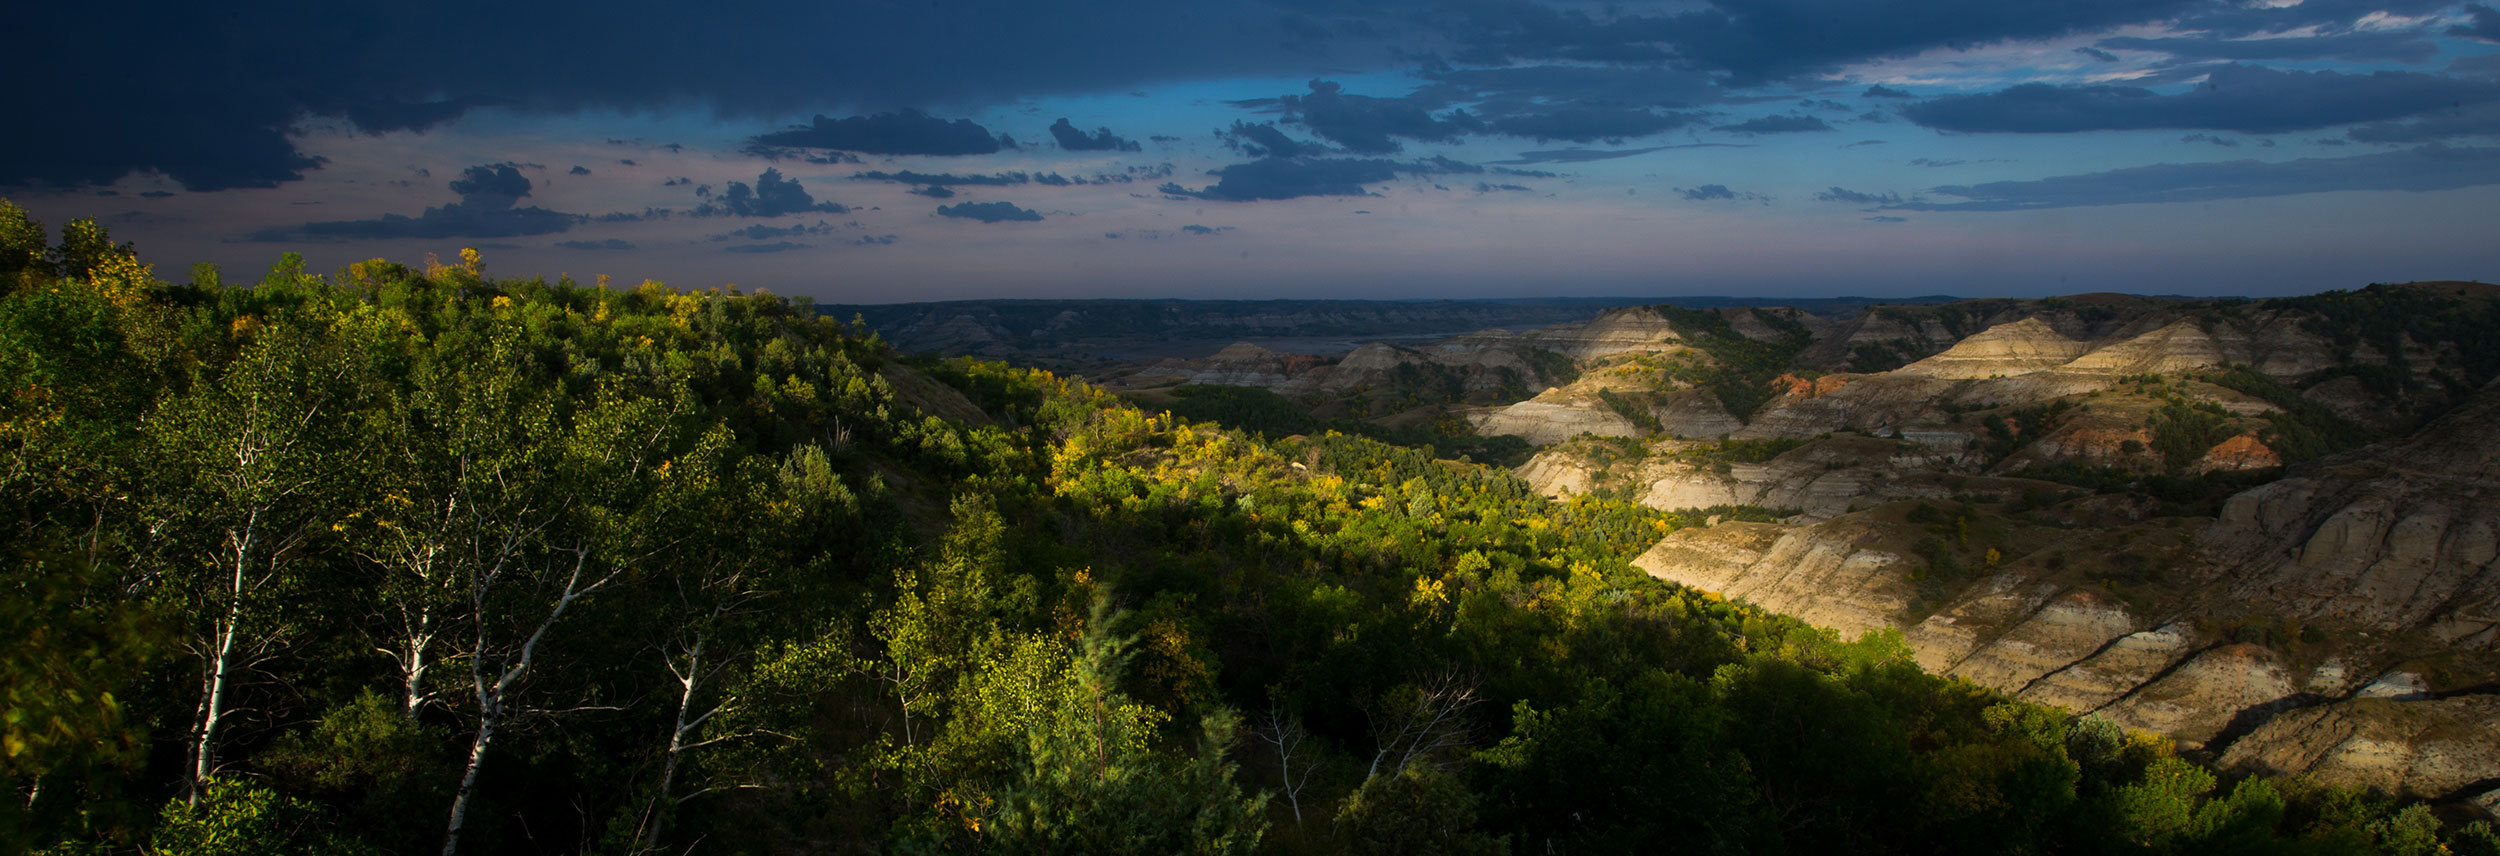 Sunset in badlands with trees in front